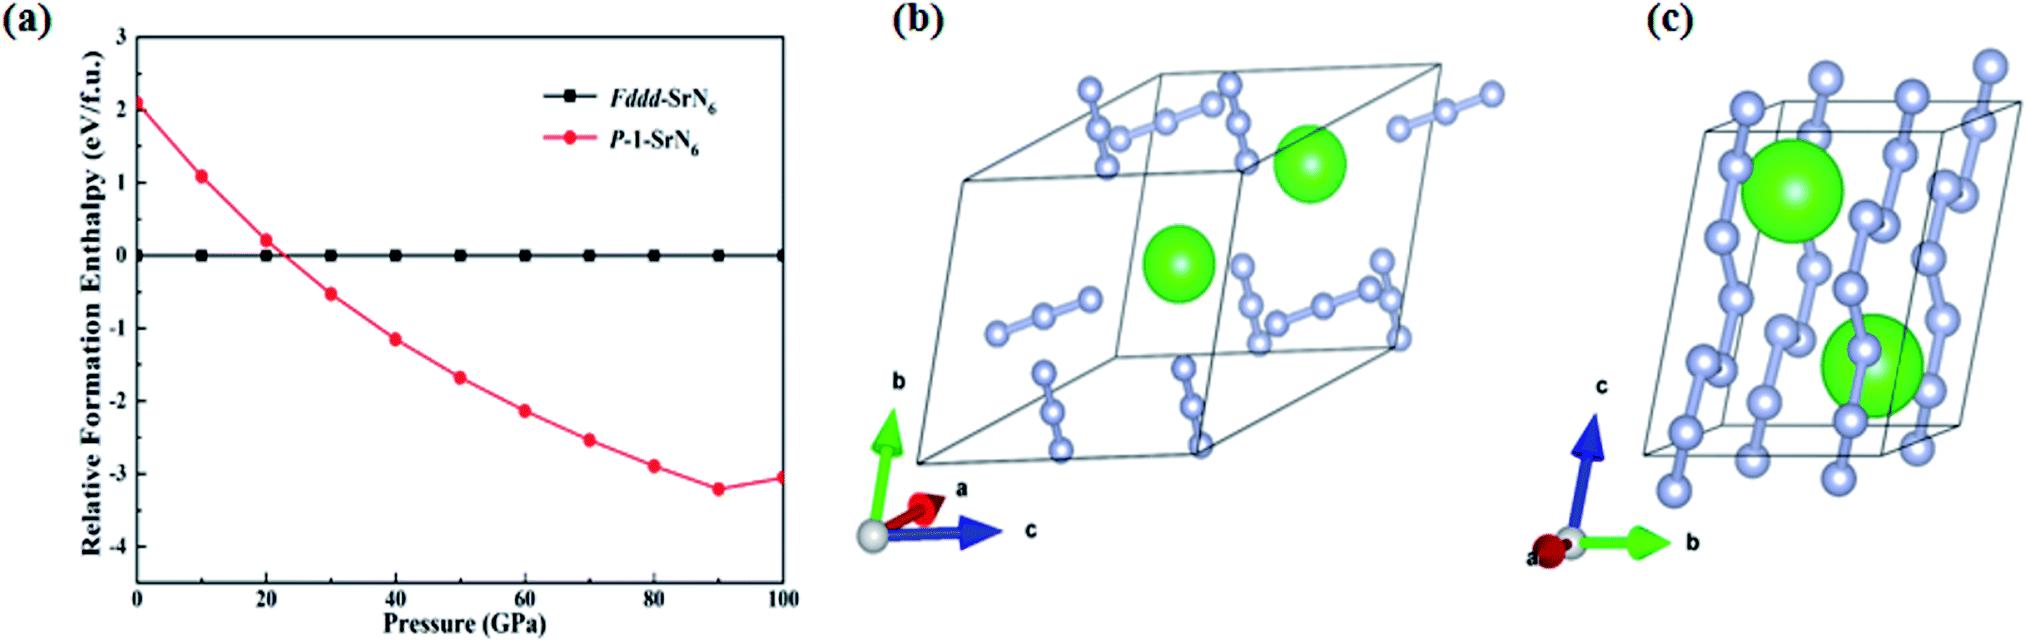 Pressure Induced Stability And Polymeric Nitrogen In Alkaline Earth Metal N Rich Nitrides 6 X Ca Sr And Ba A First Principles Study Rsc Advances Rsc Publishing Doi 10 1039 D1rah